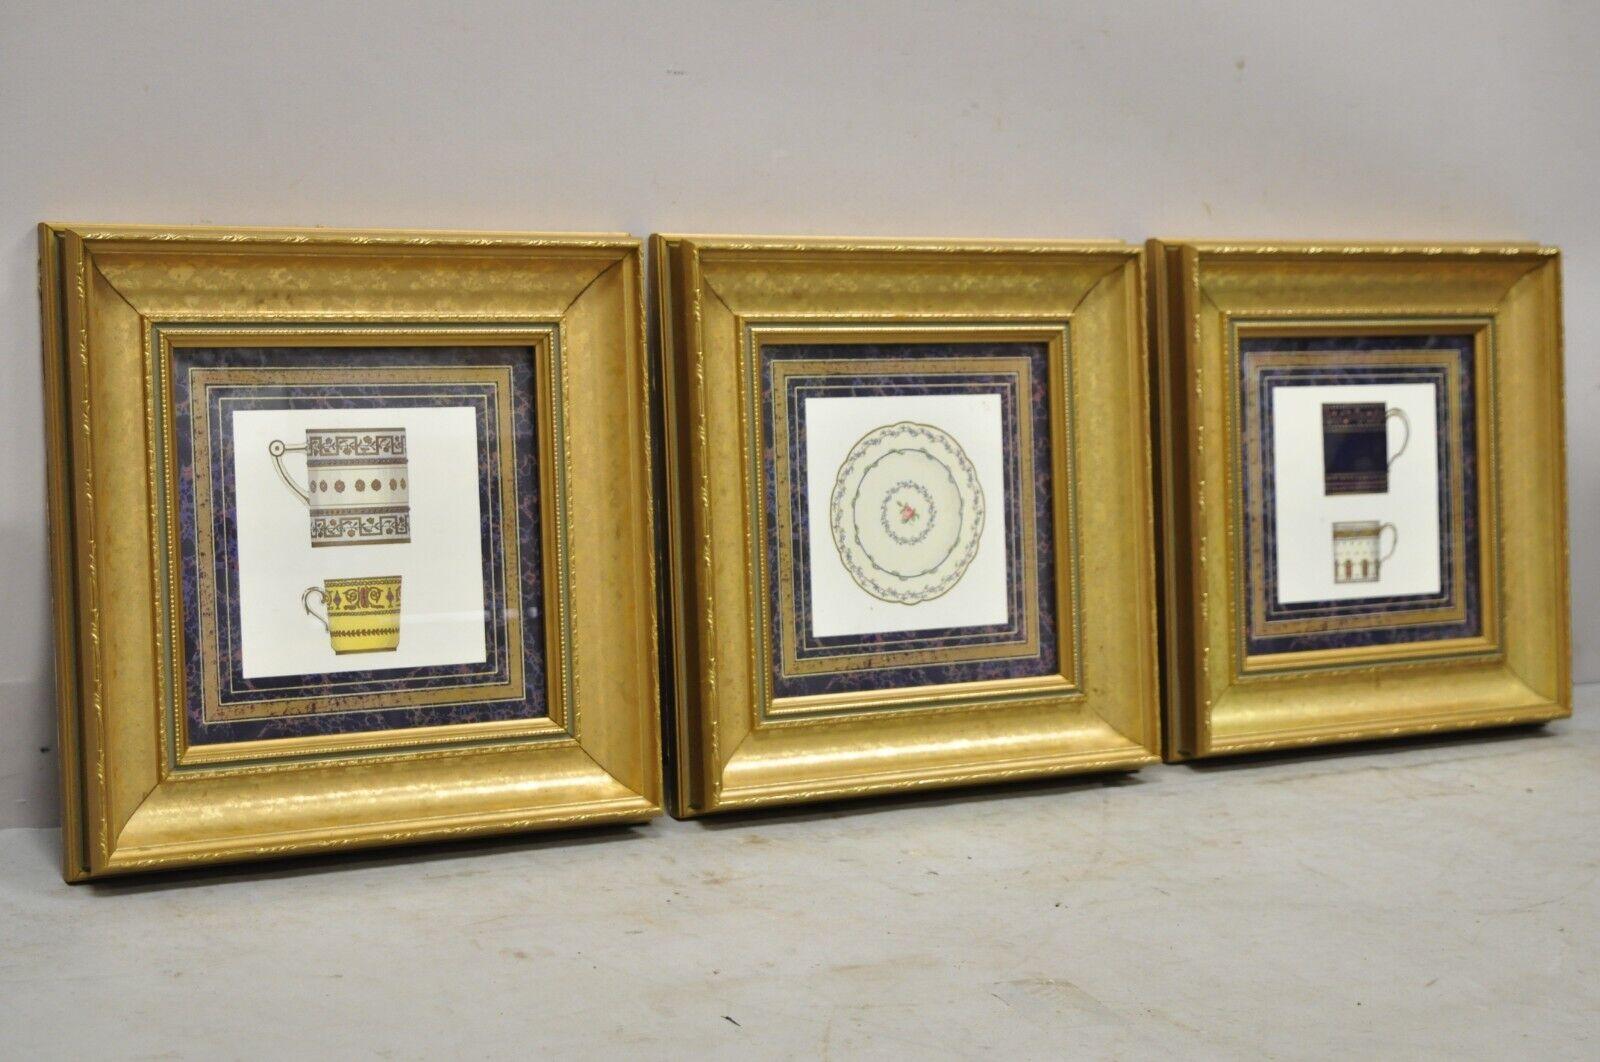 Artistic innovations framed art print Canada plate and cups - 3 pc set. Item features ornate gold frames, glass front, one print with plate and 2 others with cups, original labels, great style and form. Circa late 20th century. Measurements: 13.5